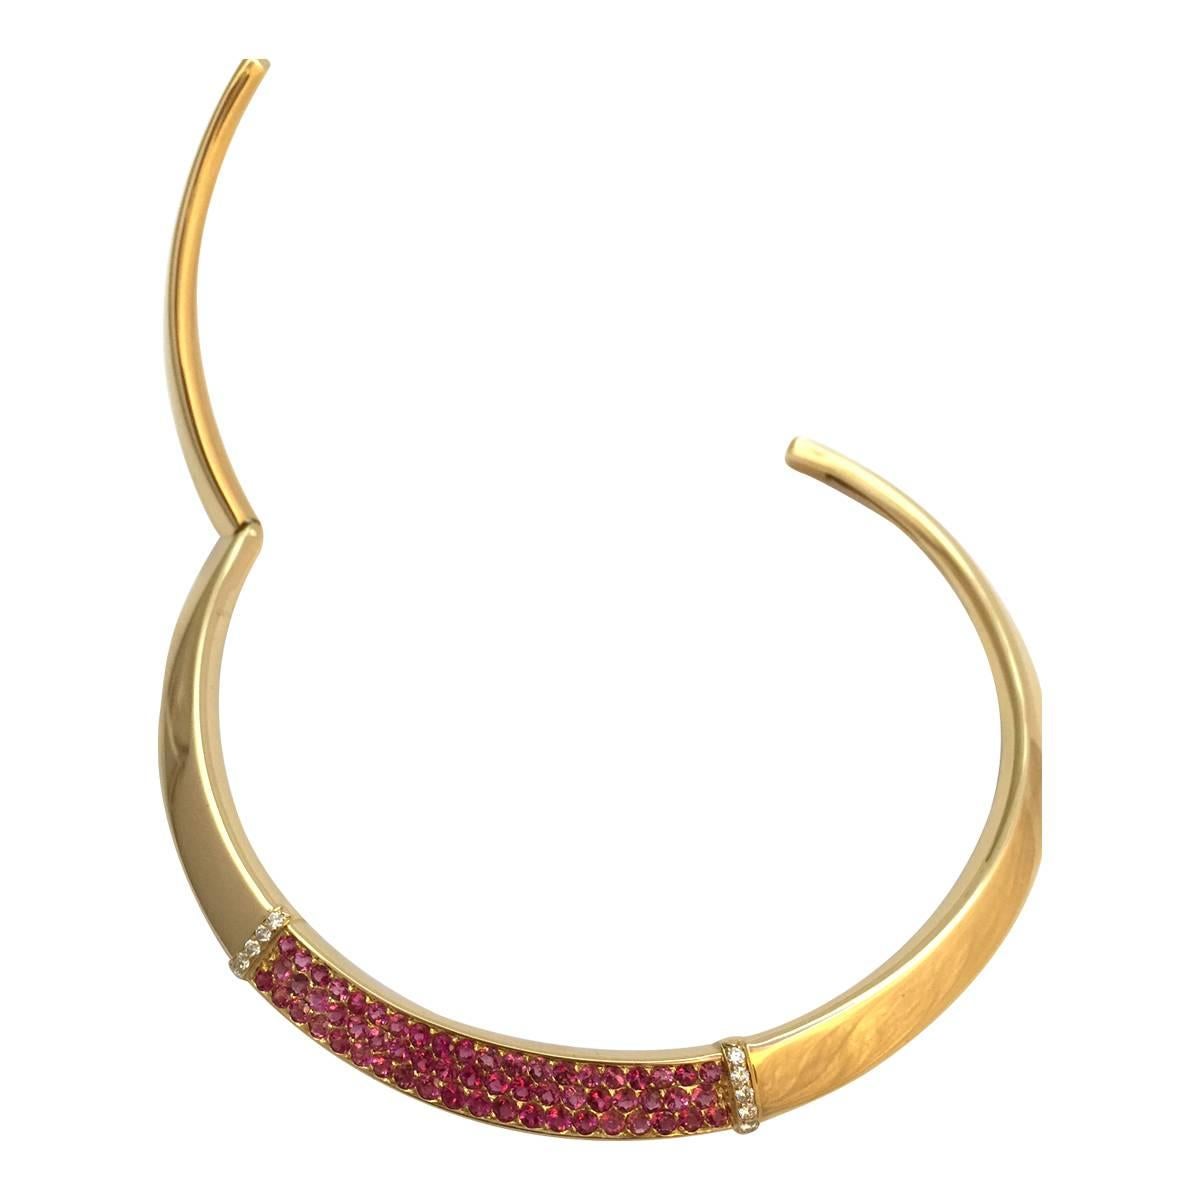 A 750/ooo yellow gold torque necklace by Van Cleef and Arpels, 